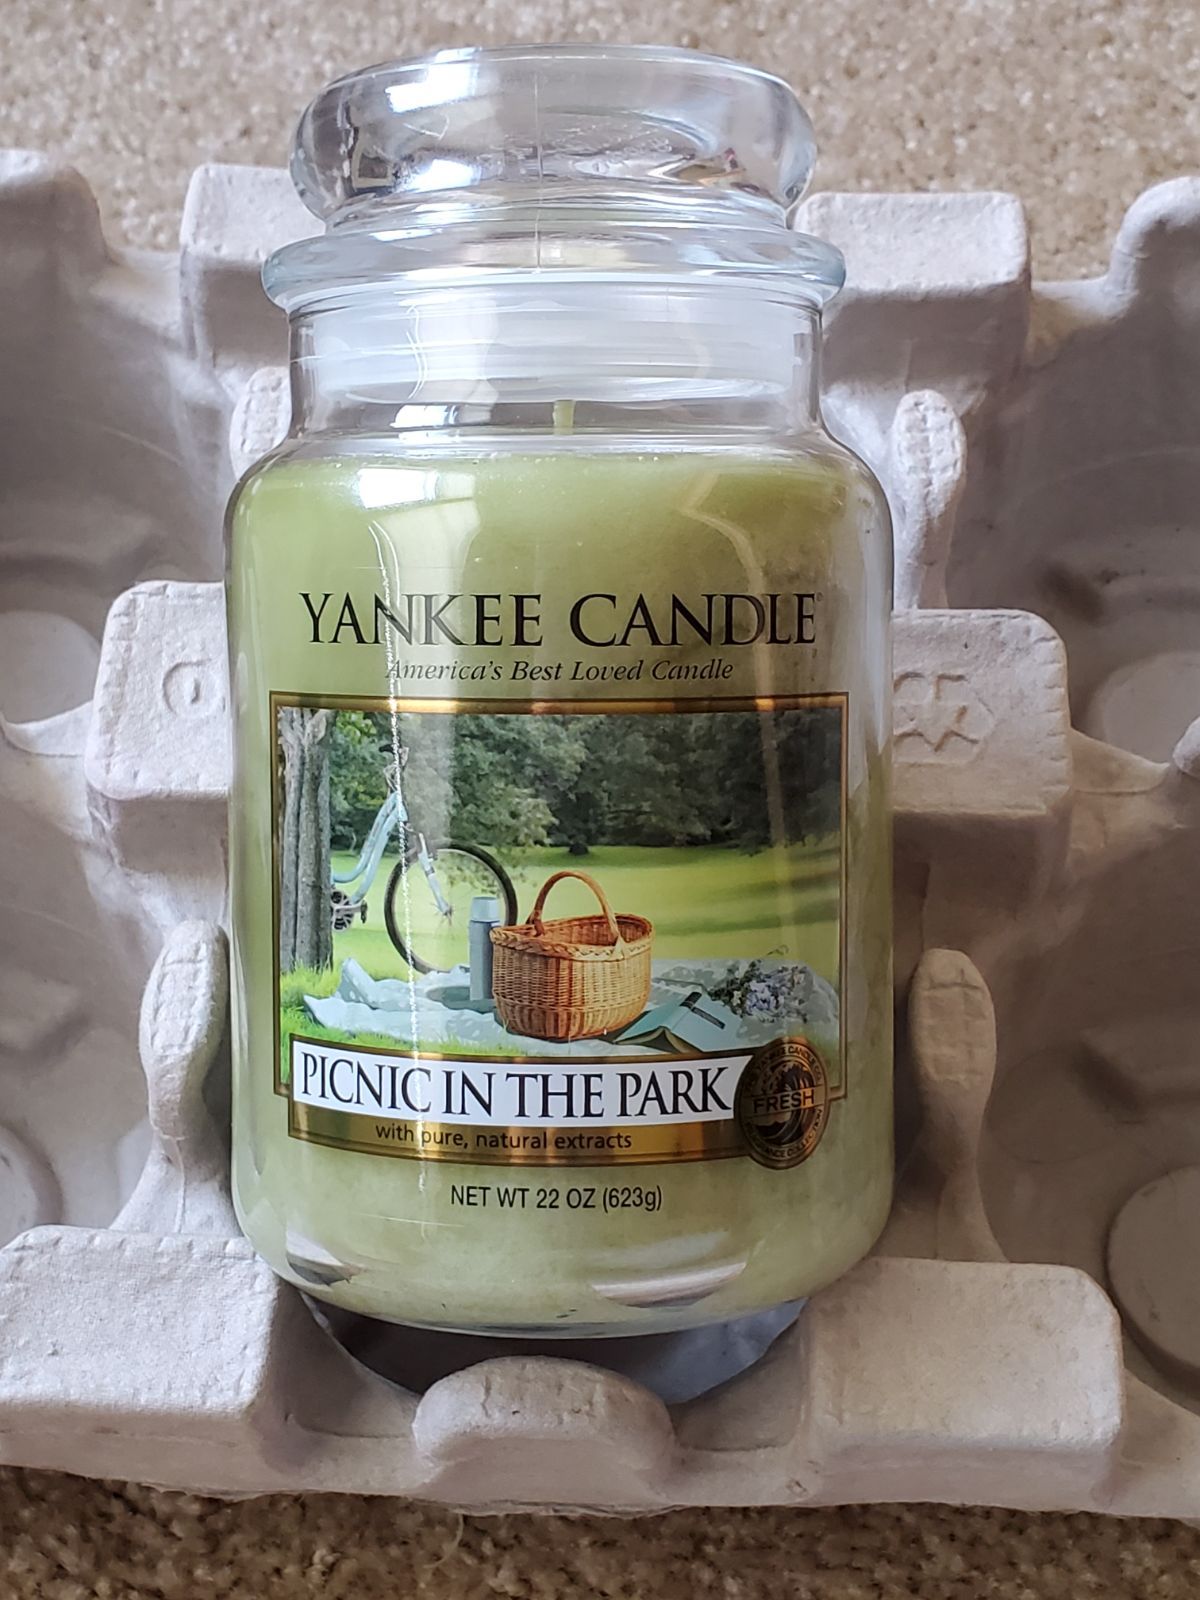 PICNIC IN THE PARK Large 22 oz Jar Candle Yankee Candle Lot of 2 